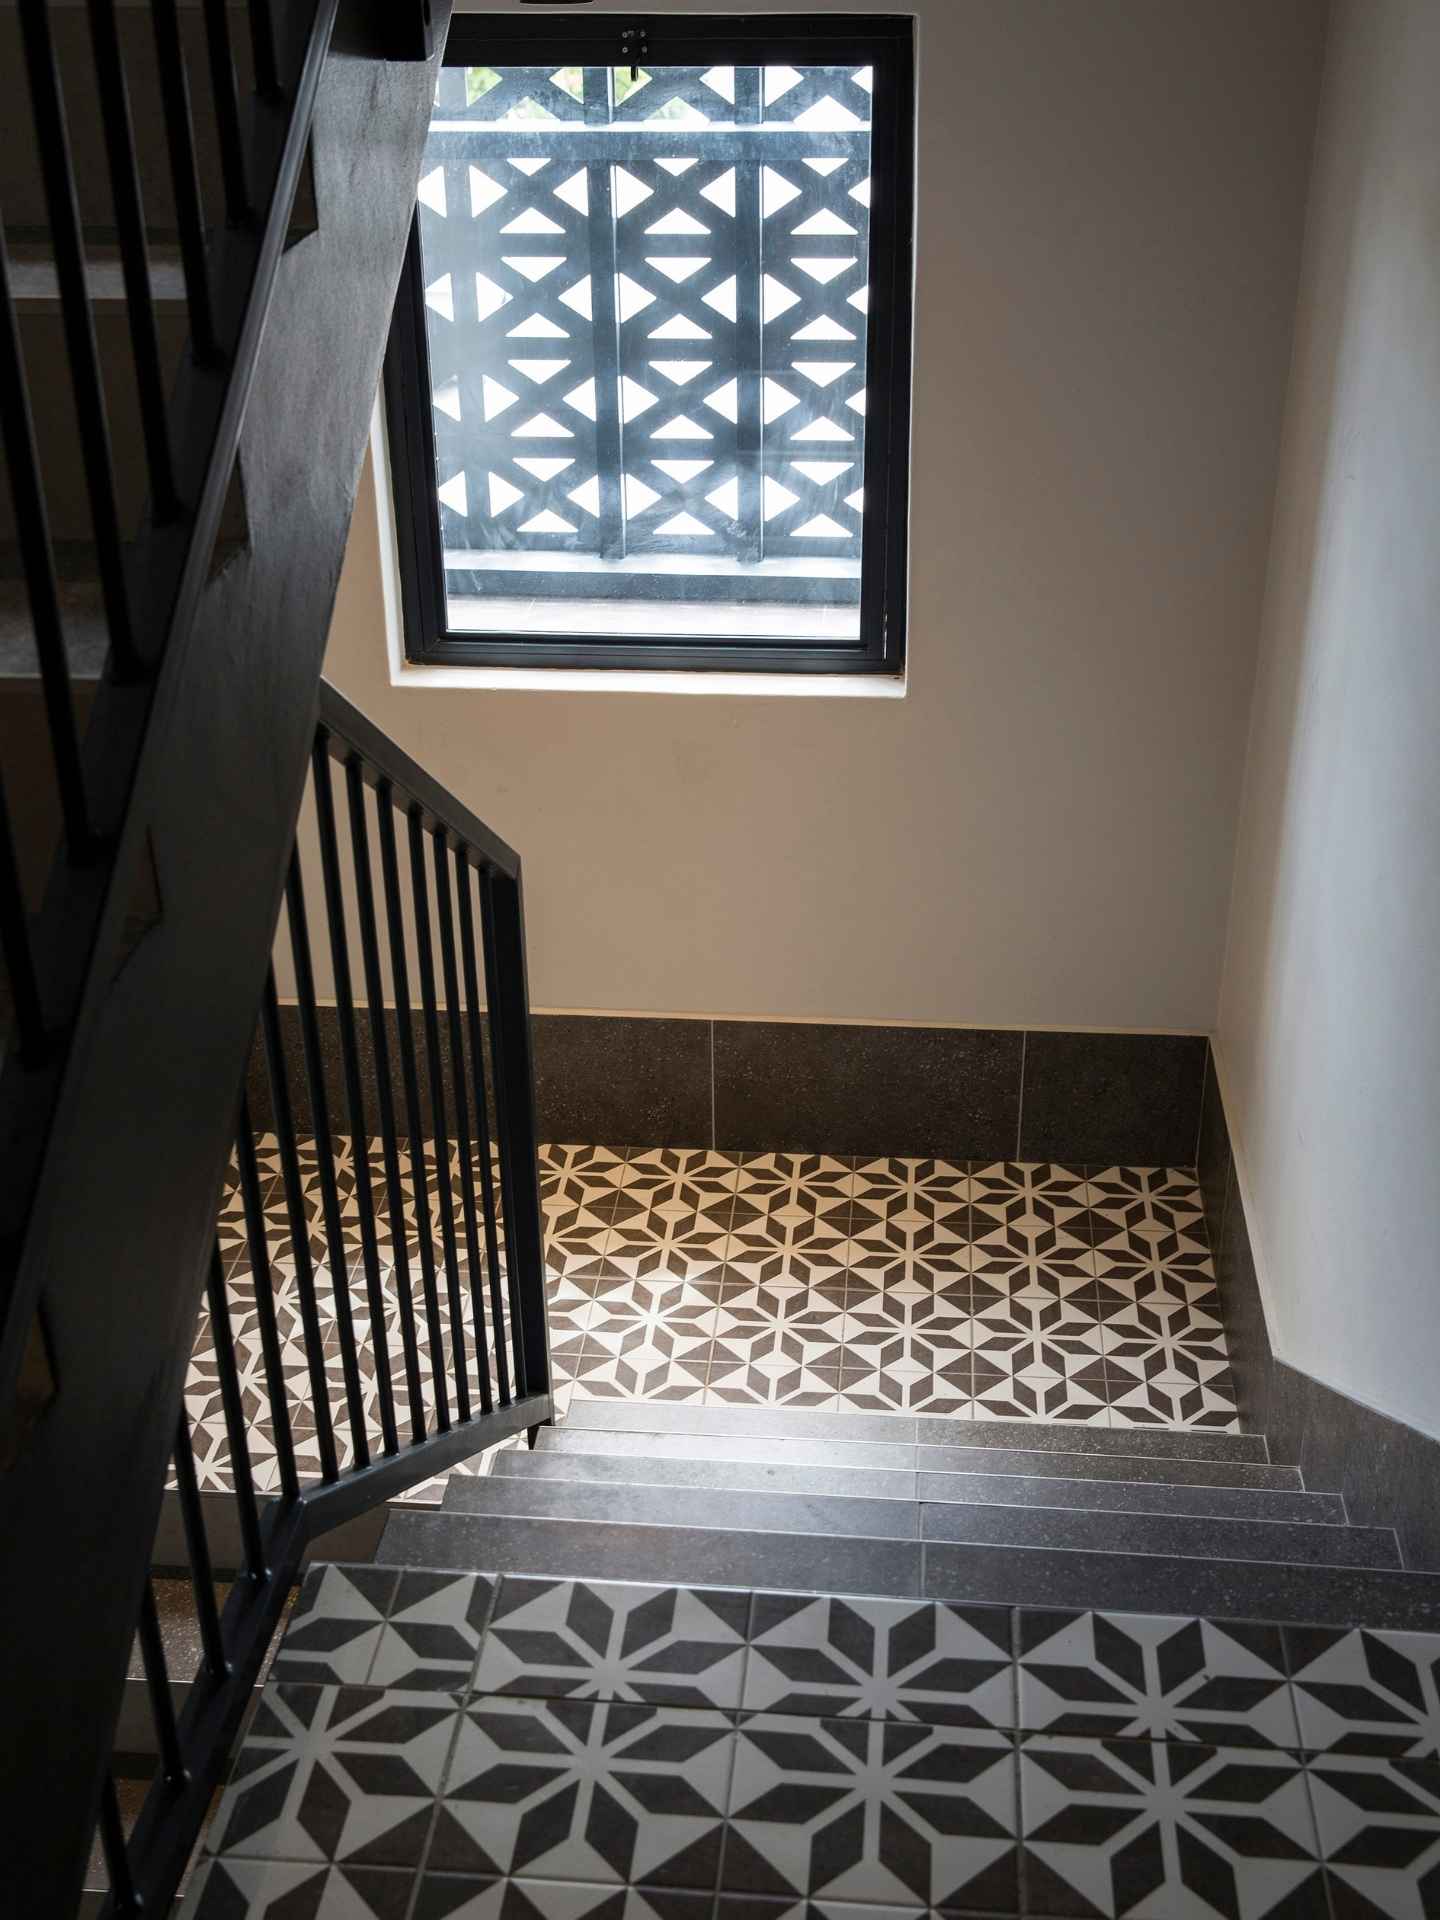 Modern Retro stairwell with patterned tiles